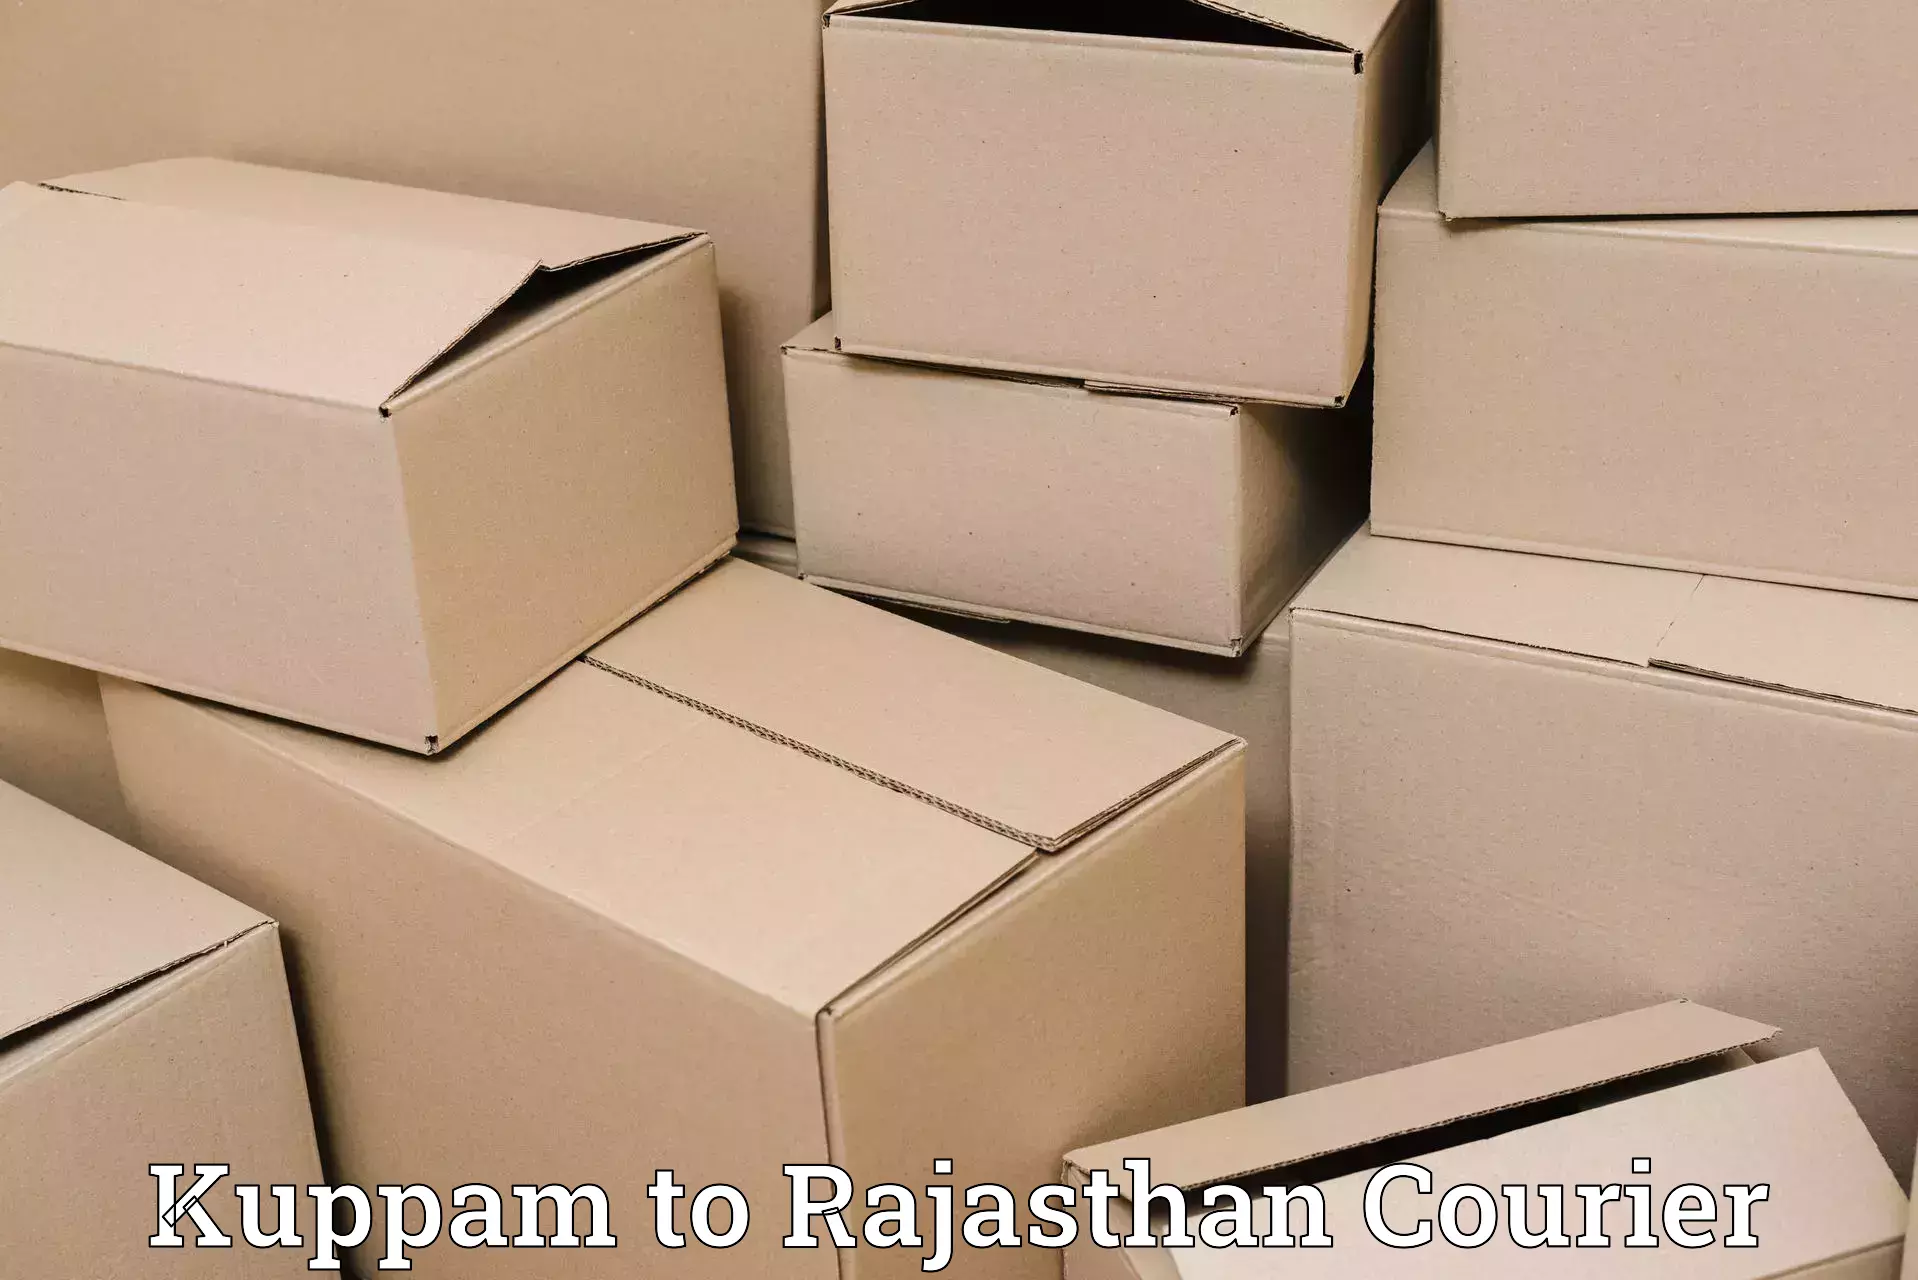 Bulk courier orders Kuppam to Yeswanthapur